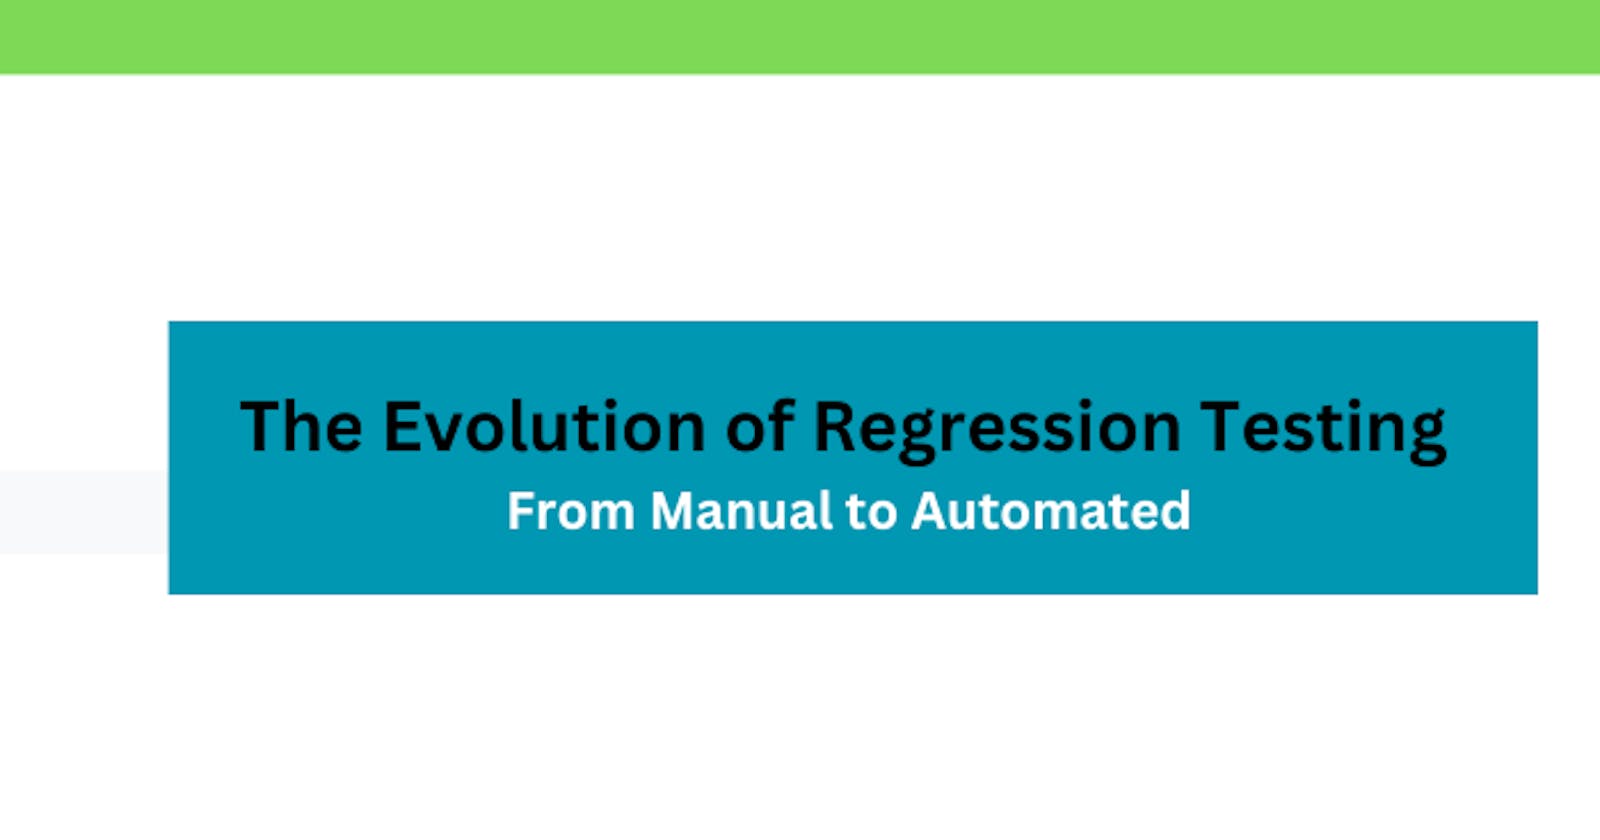 The Evolution of Regression Testing: From Manual to Automated